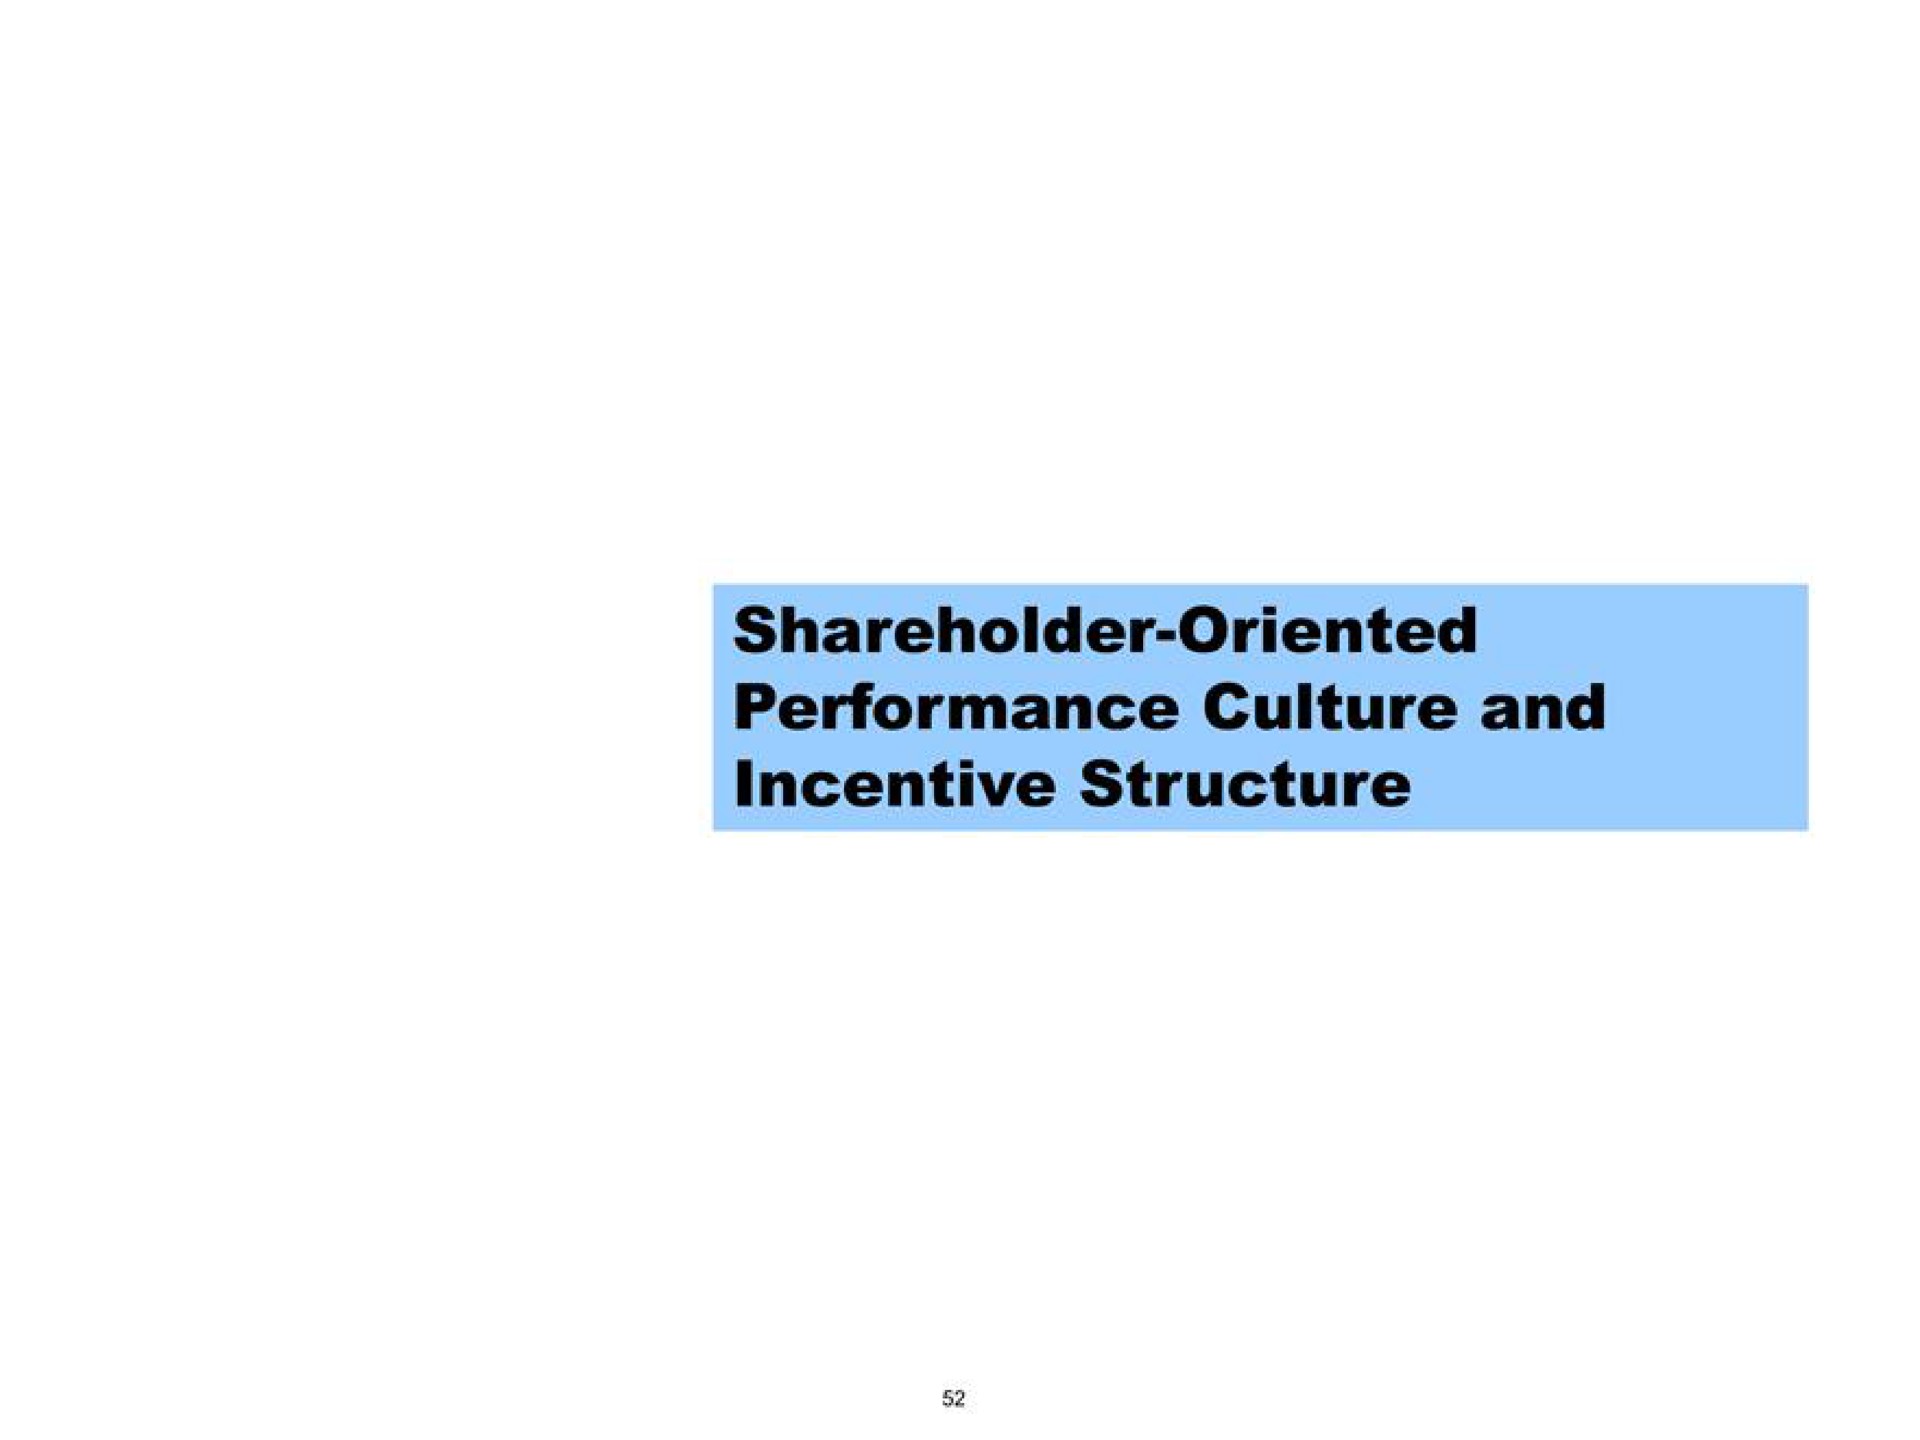 shareholder oriented performance culture and incentive structure | Pershing Square